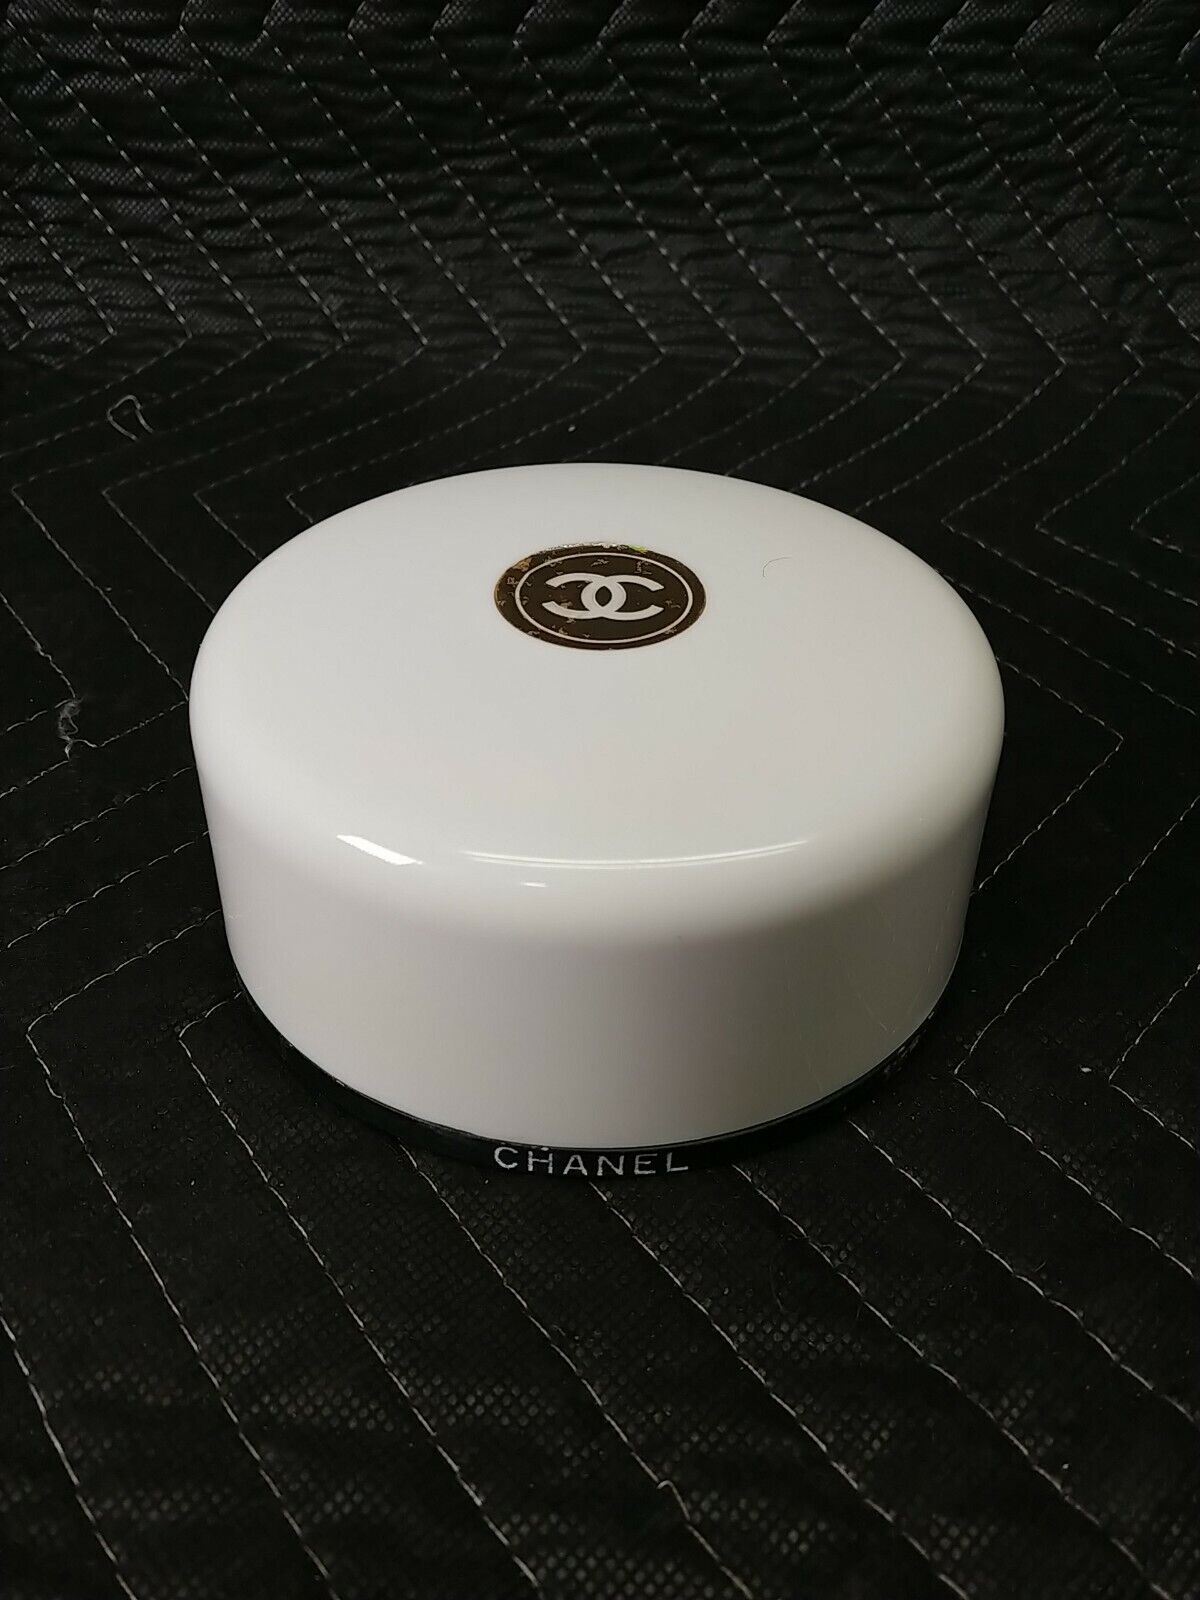 CHANEL : After Bath Powder N°5. 150g. In blister pack